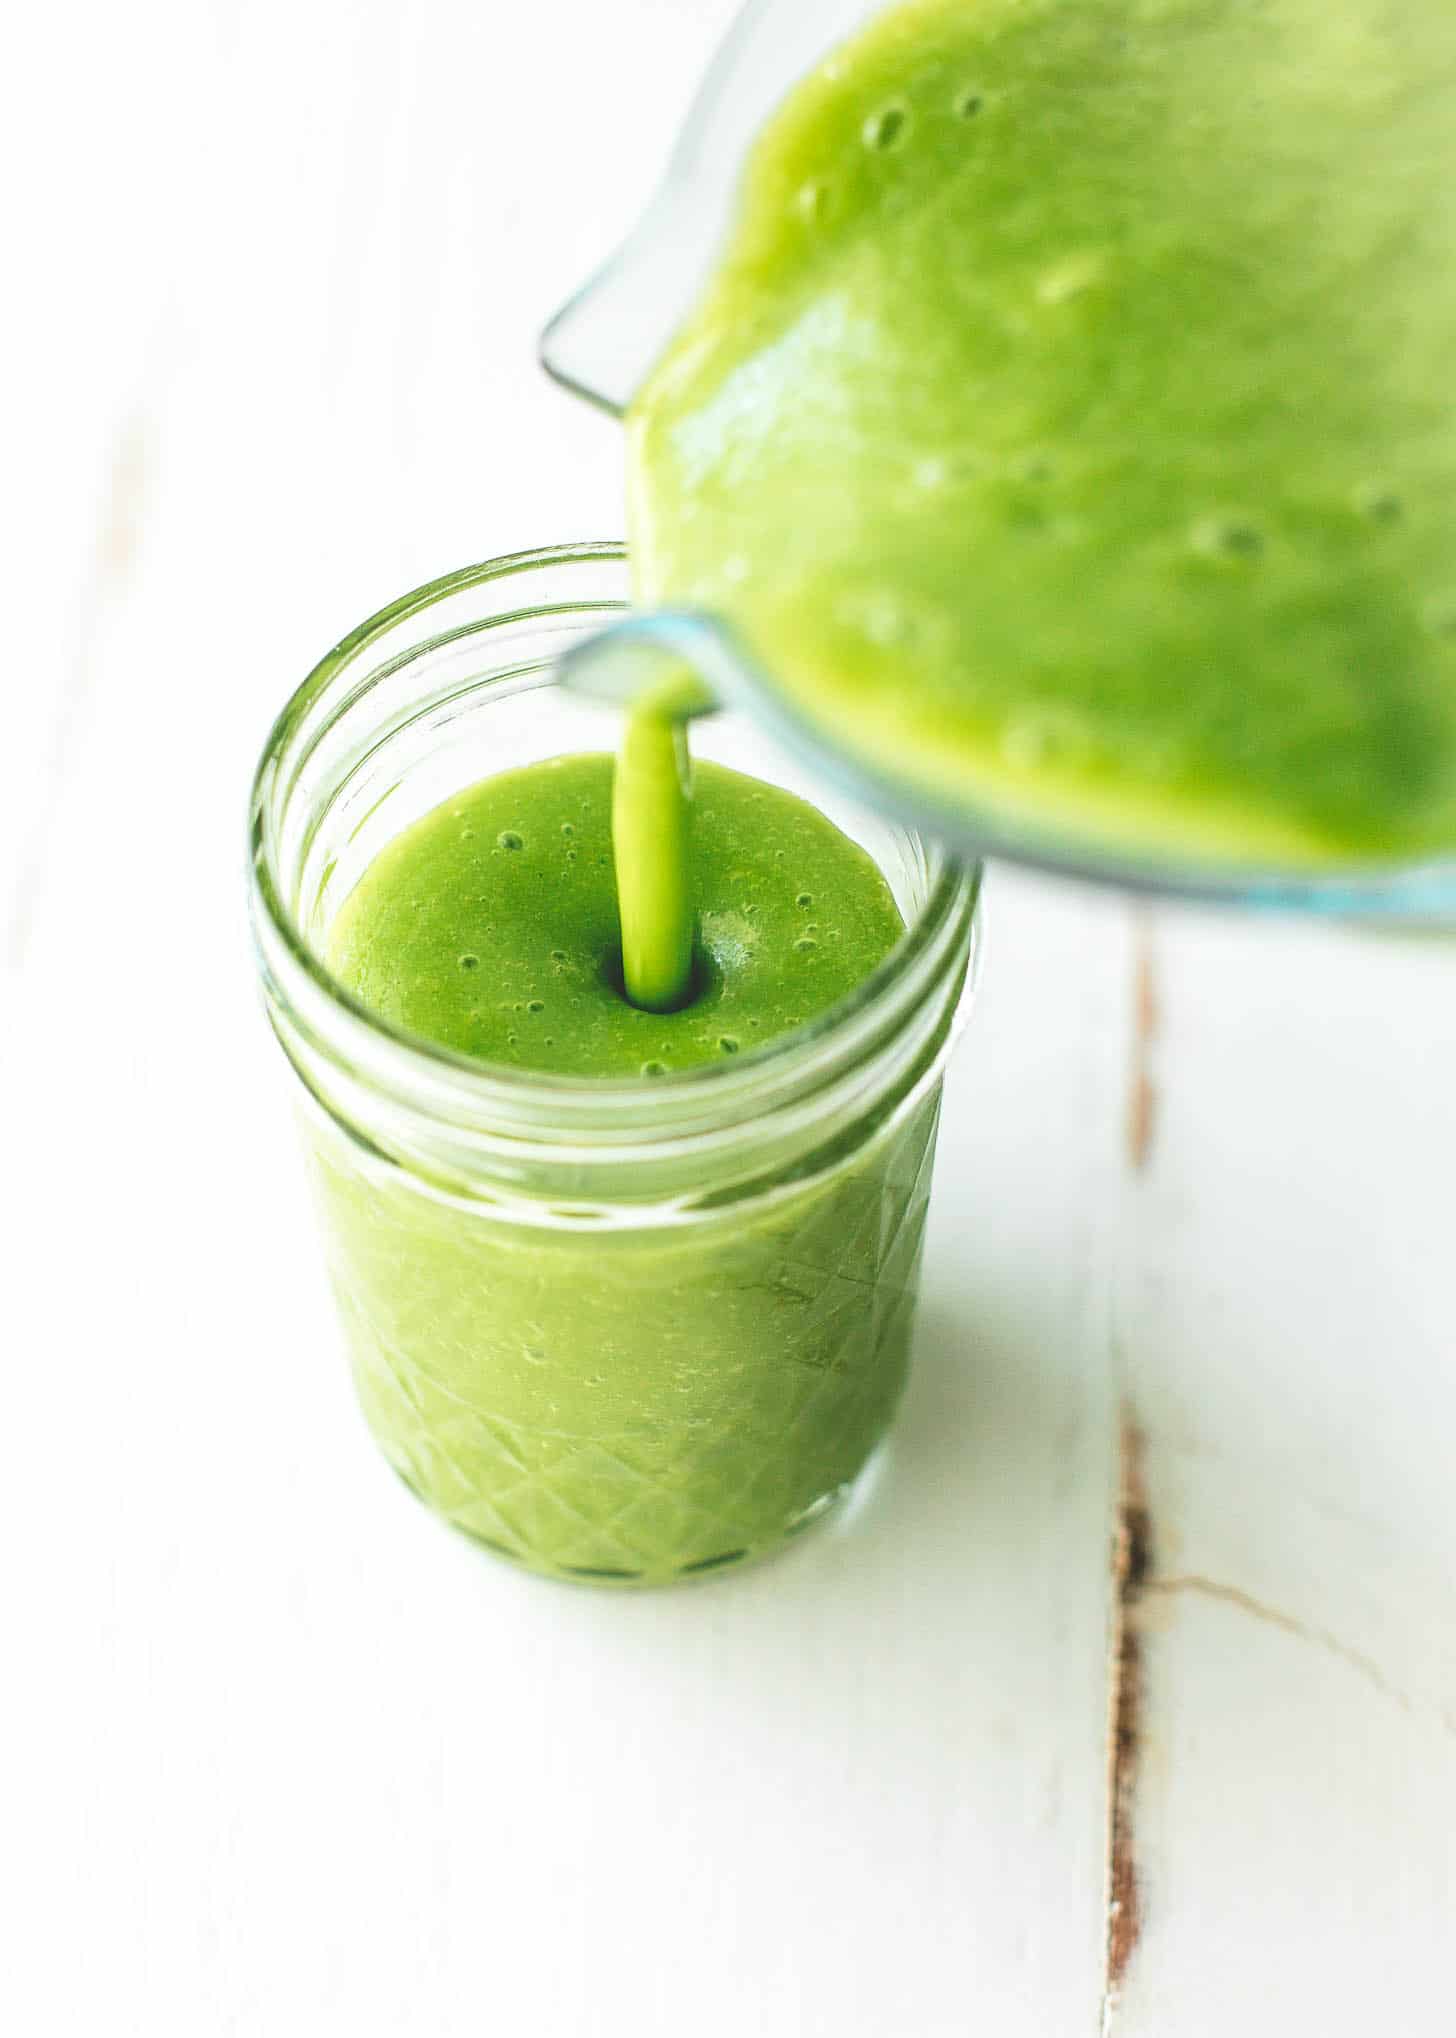 Pouring Green Smoothie into a glass jar